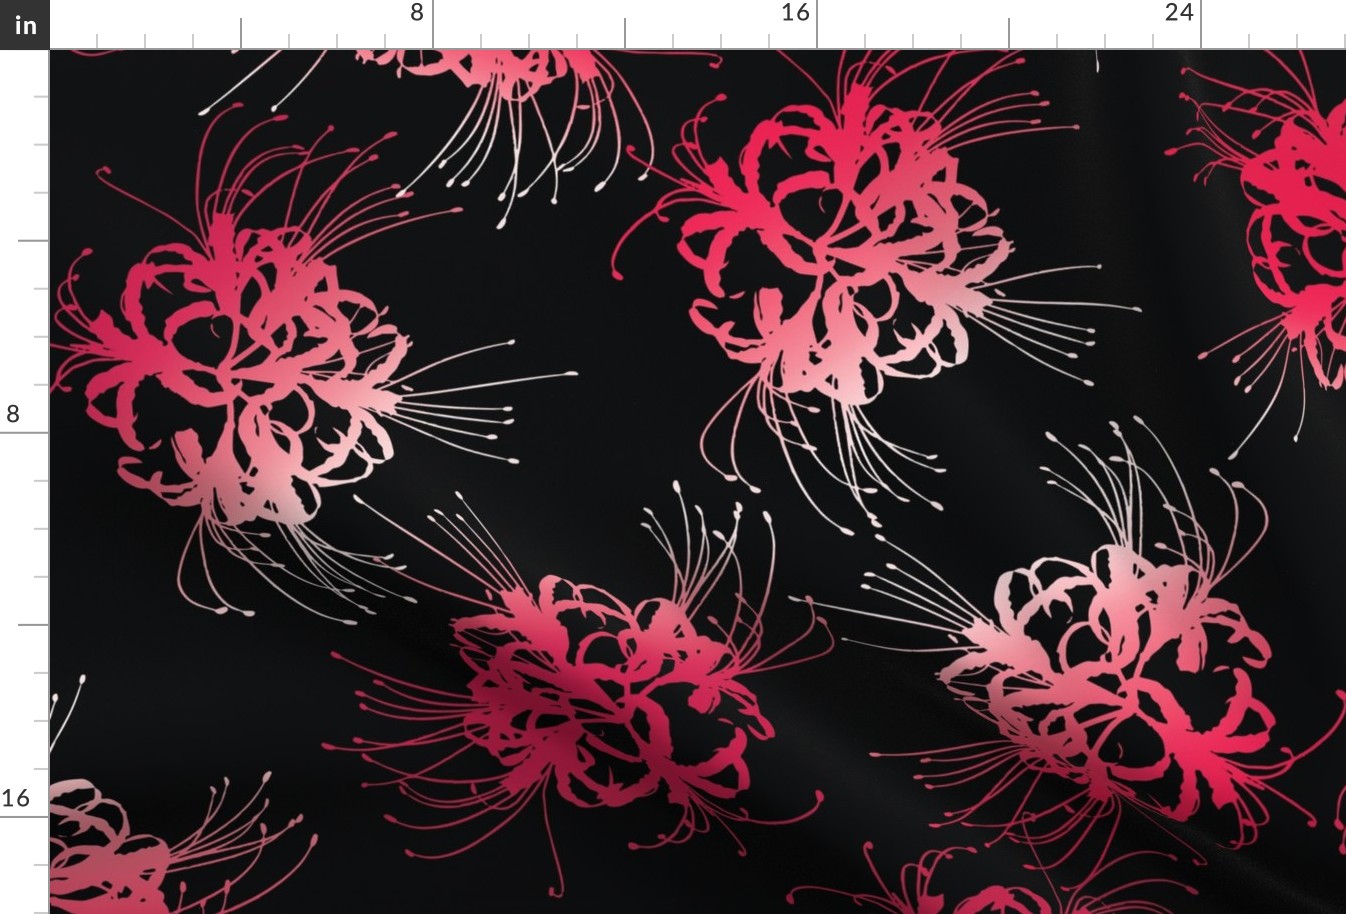 Spider Lily - Spirit DBD Hooked on You Fabric